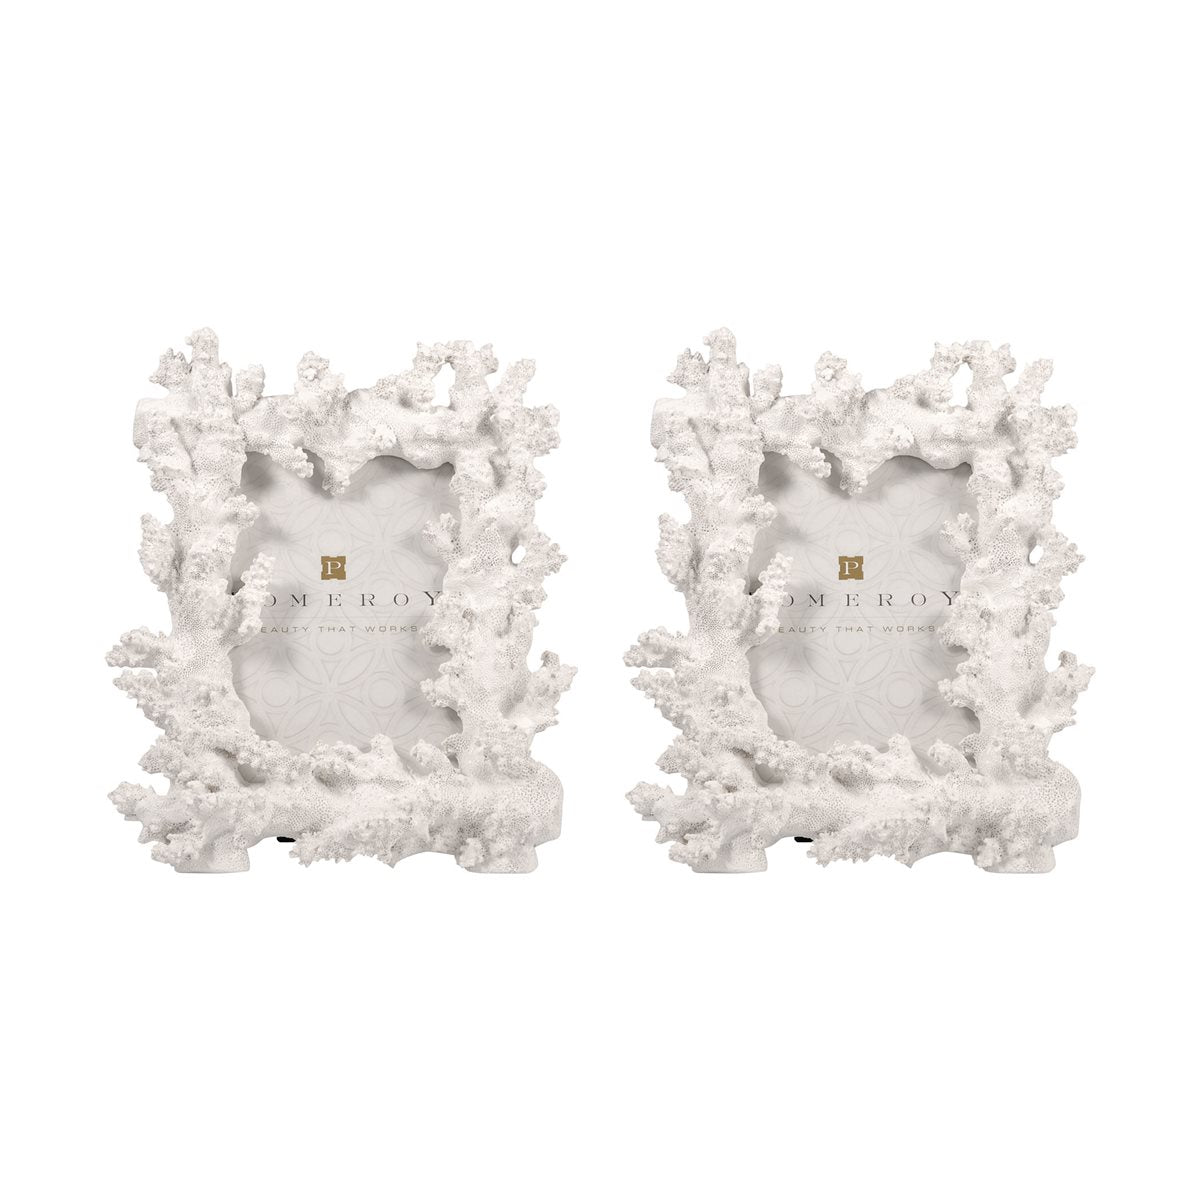 Coralyn Picture Frames (Set of 2)